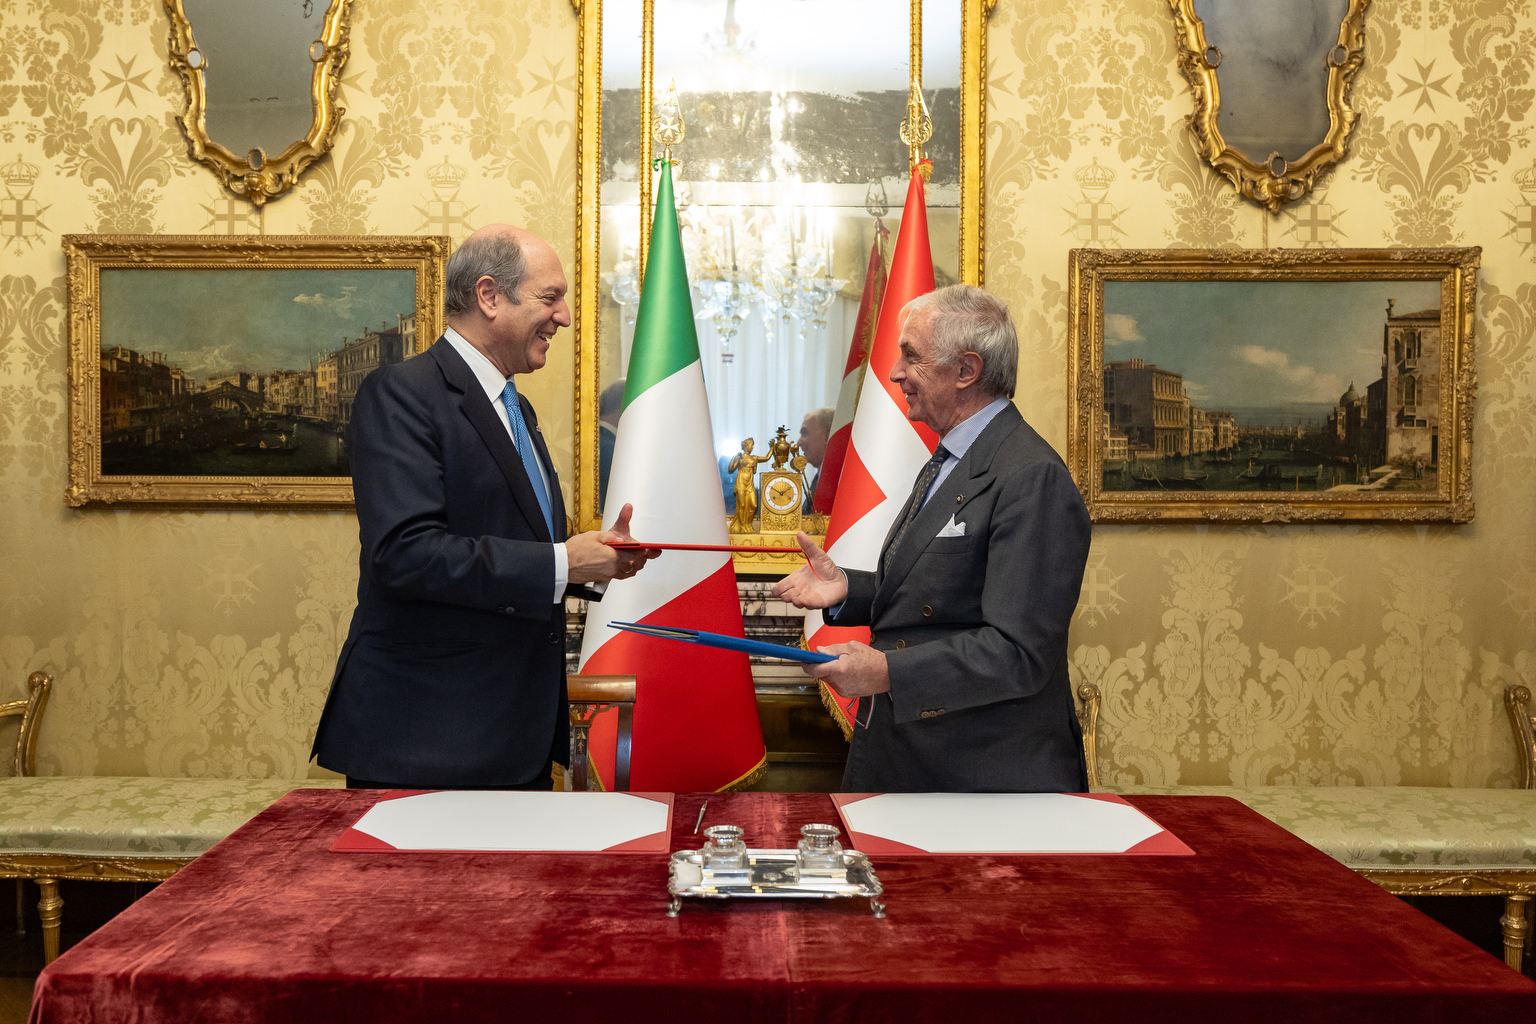 Signature of agreement with Italian Republic for Order of Malta’s Italian Relief Corps